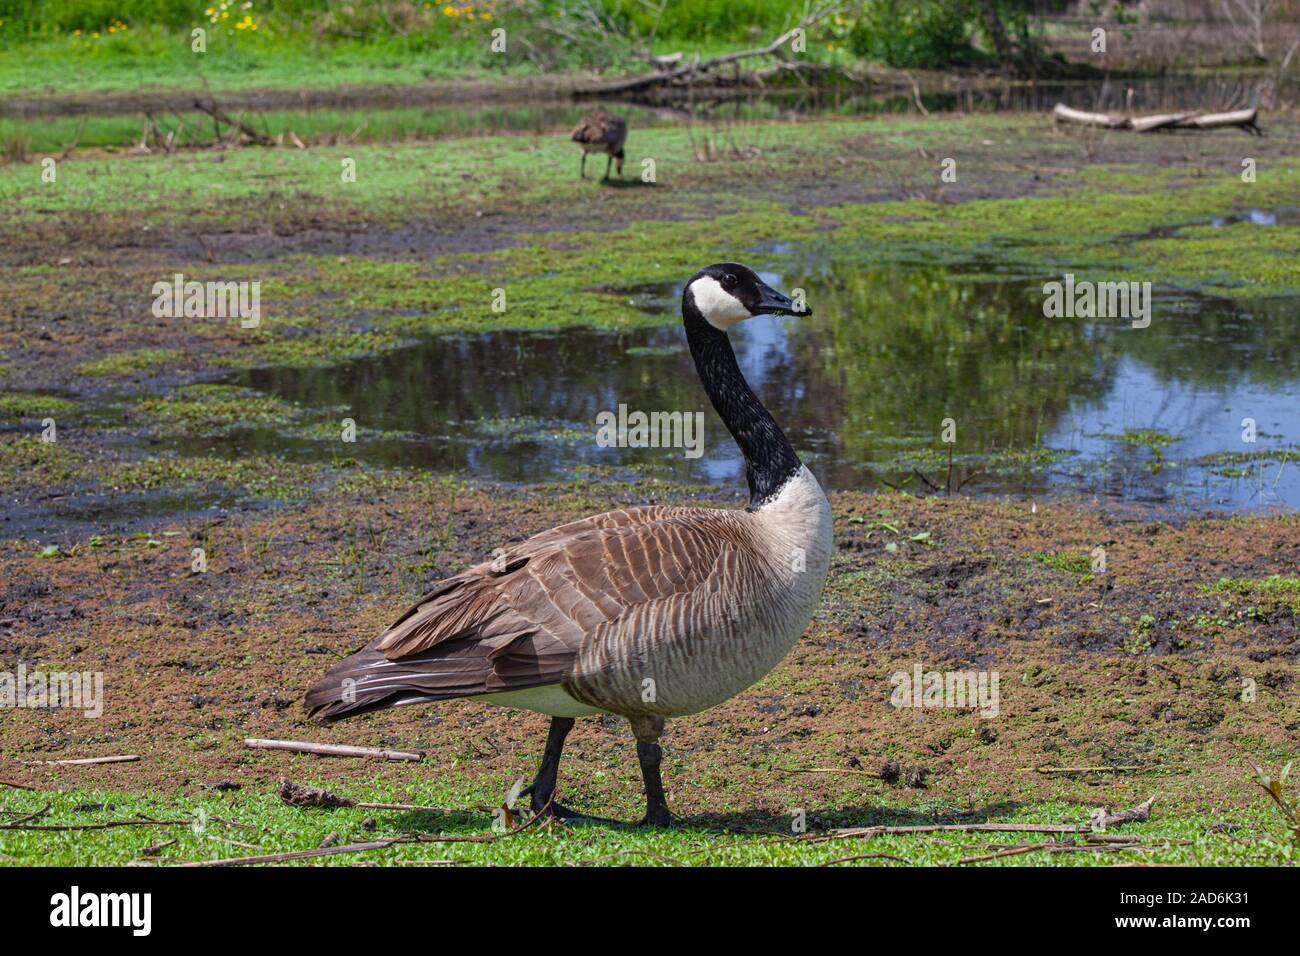 Canadian Geese, Madrona Marsh Wetlands is a vernal freshwater marsh and is approximately 43 acres. torrance, California, USA Stock Photo